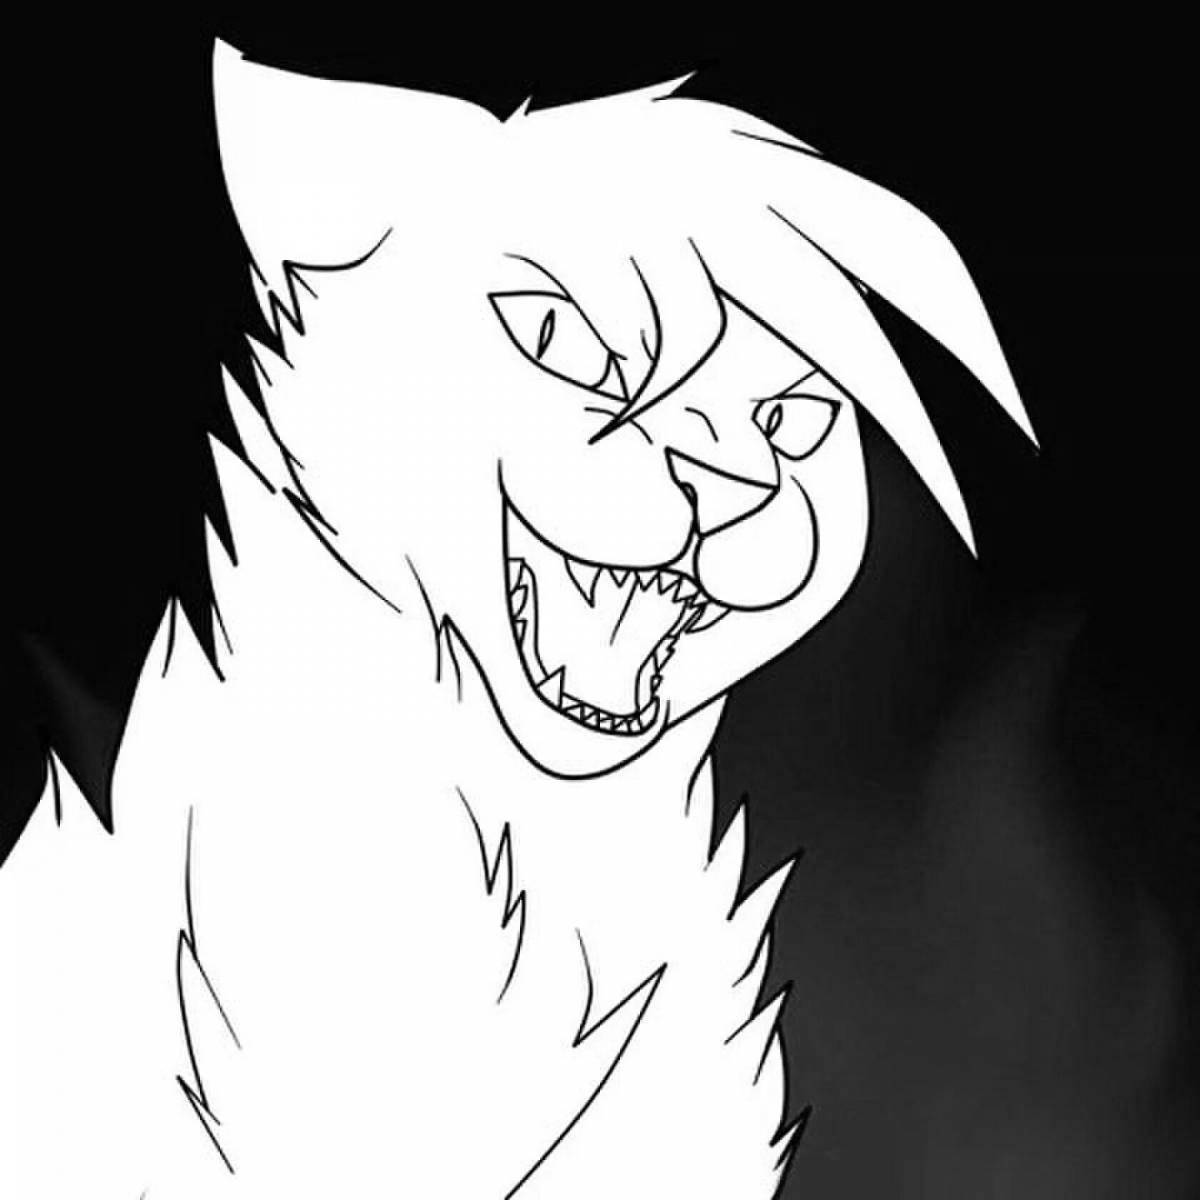 Coloring page provoked angry cat